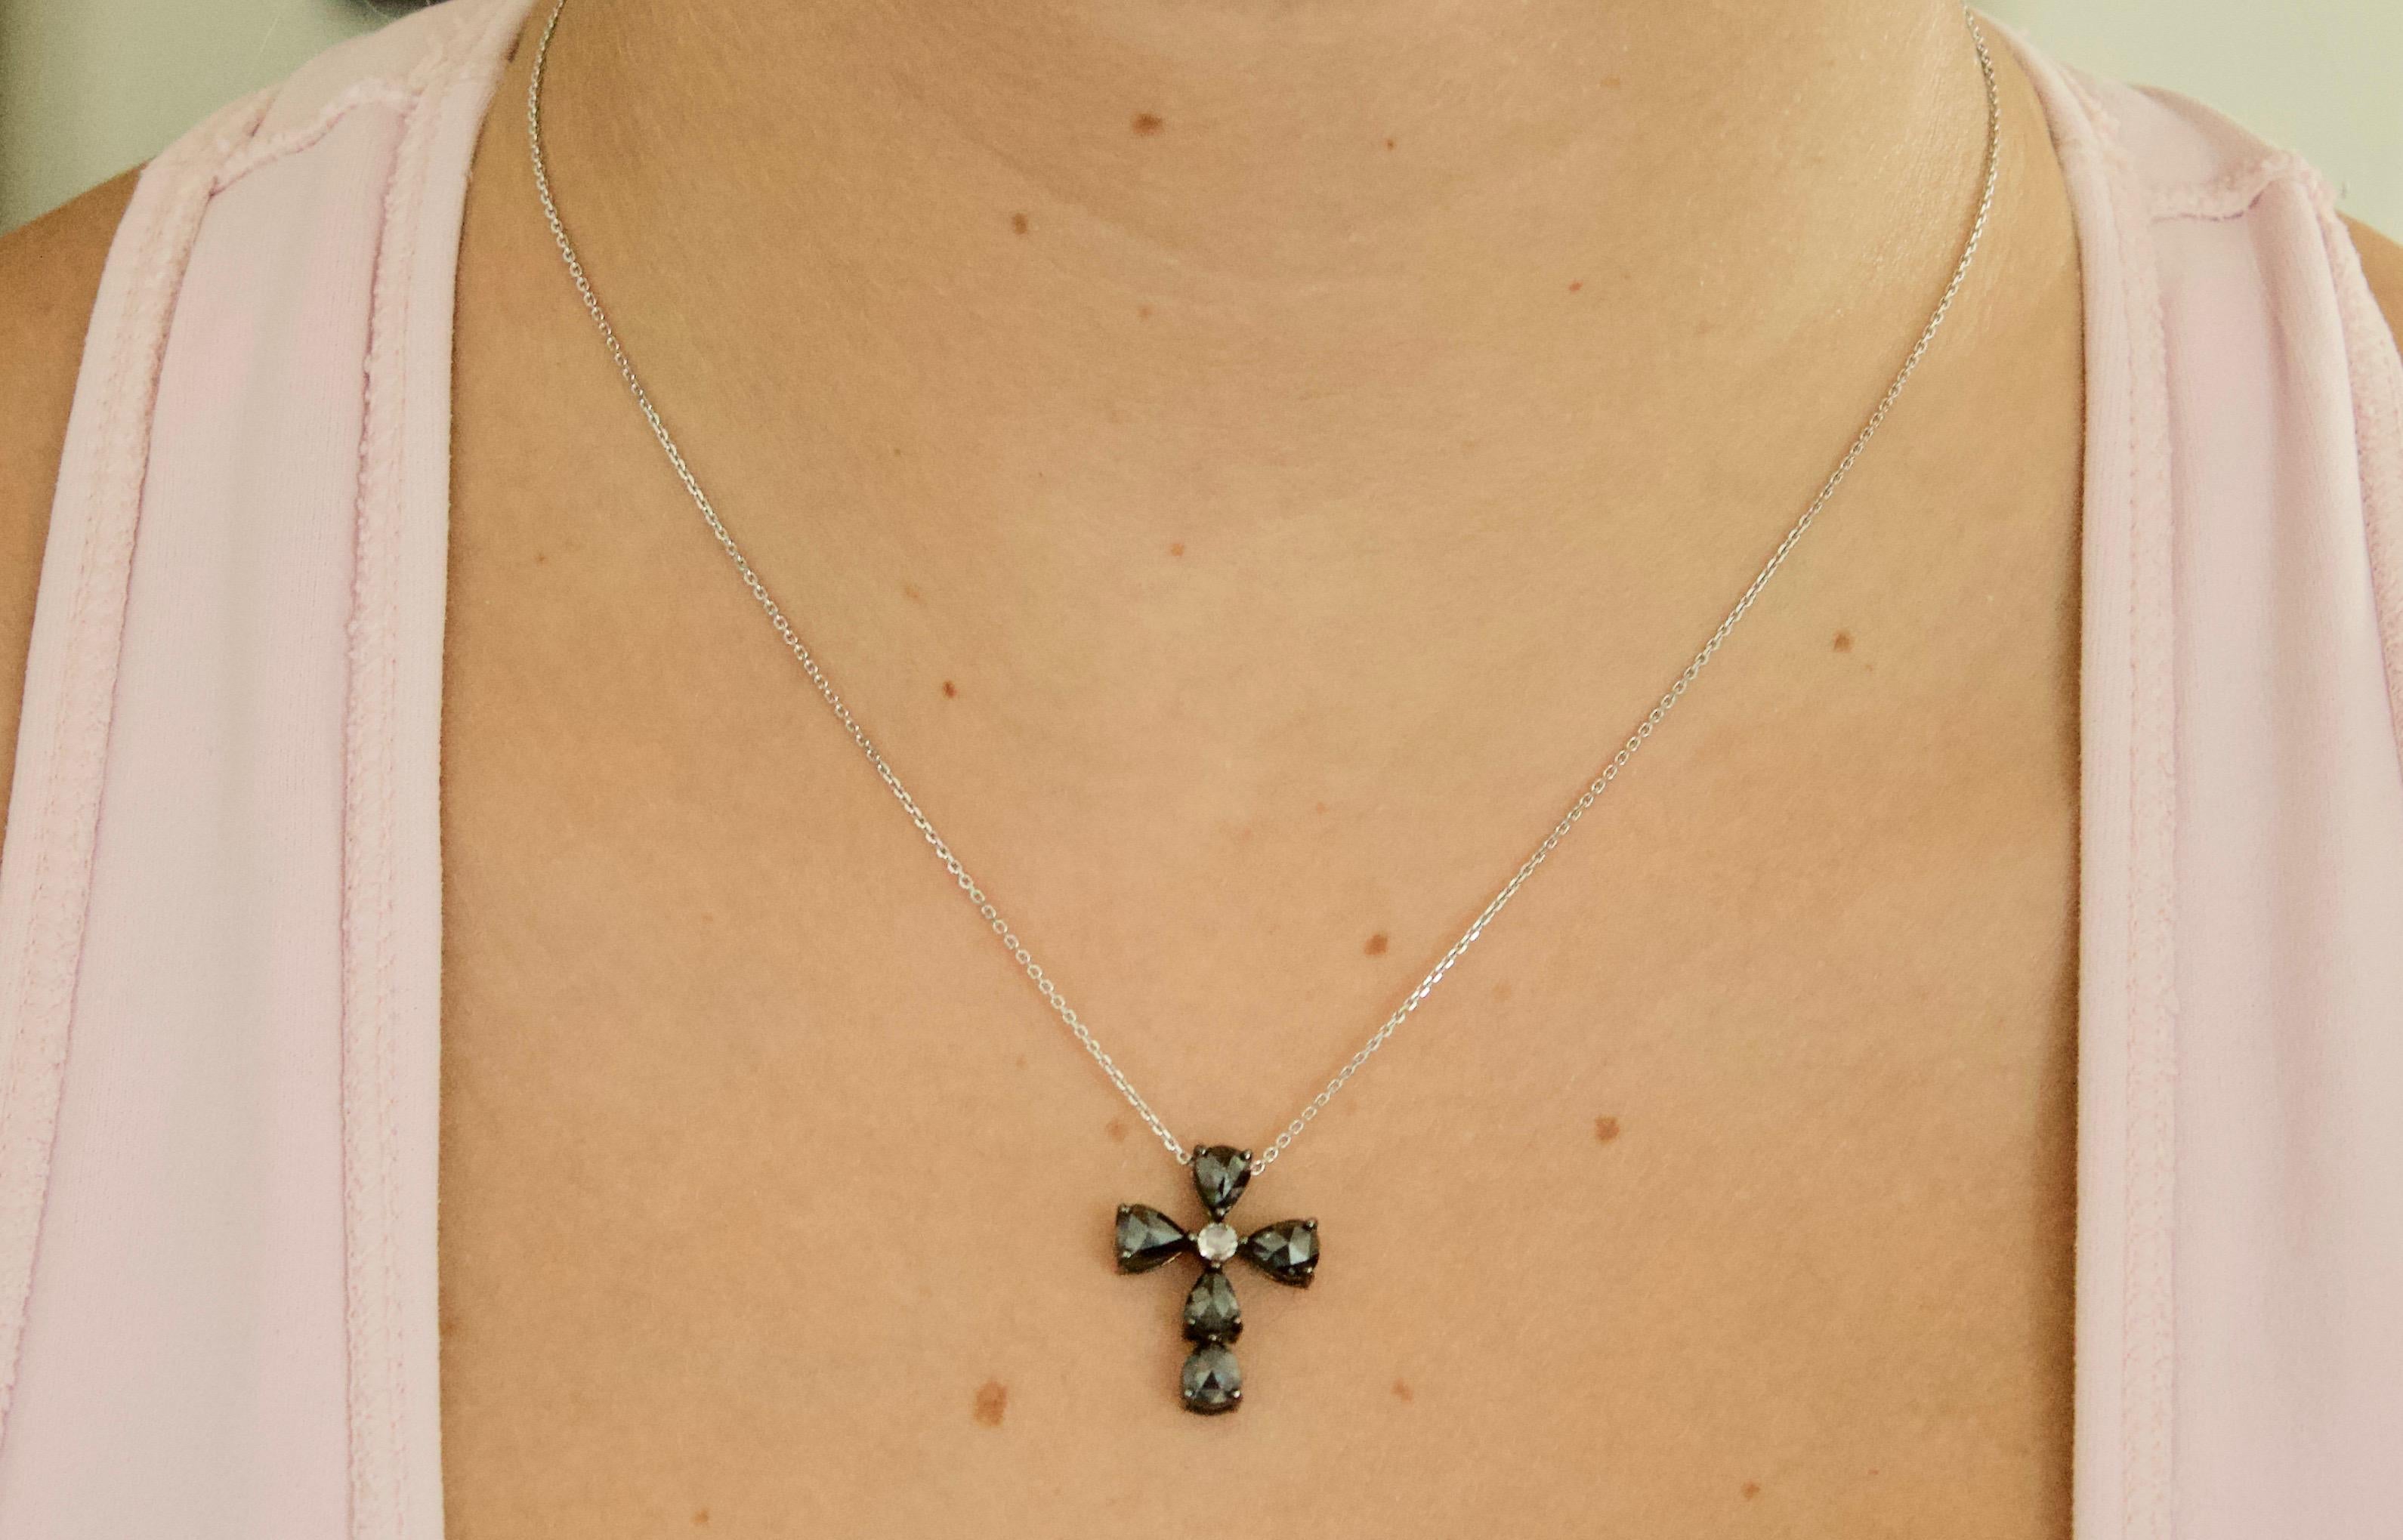 Black Diamond Cross in 18k Oxidized White Gold 1.93 cts.  
Dangles From a 22 inch Adjustable Chain (a slide allows the chain to be shortened for infinite looks)
Six Pear Shaped Black Diamonds Centered with One Round Rose Cut Diamond
Designed